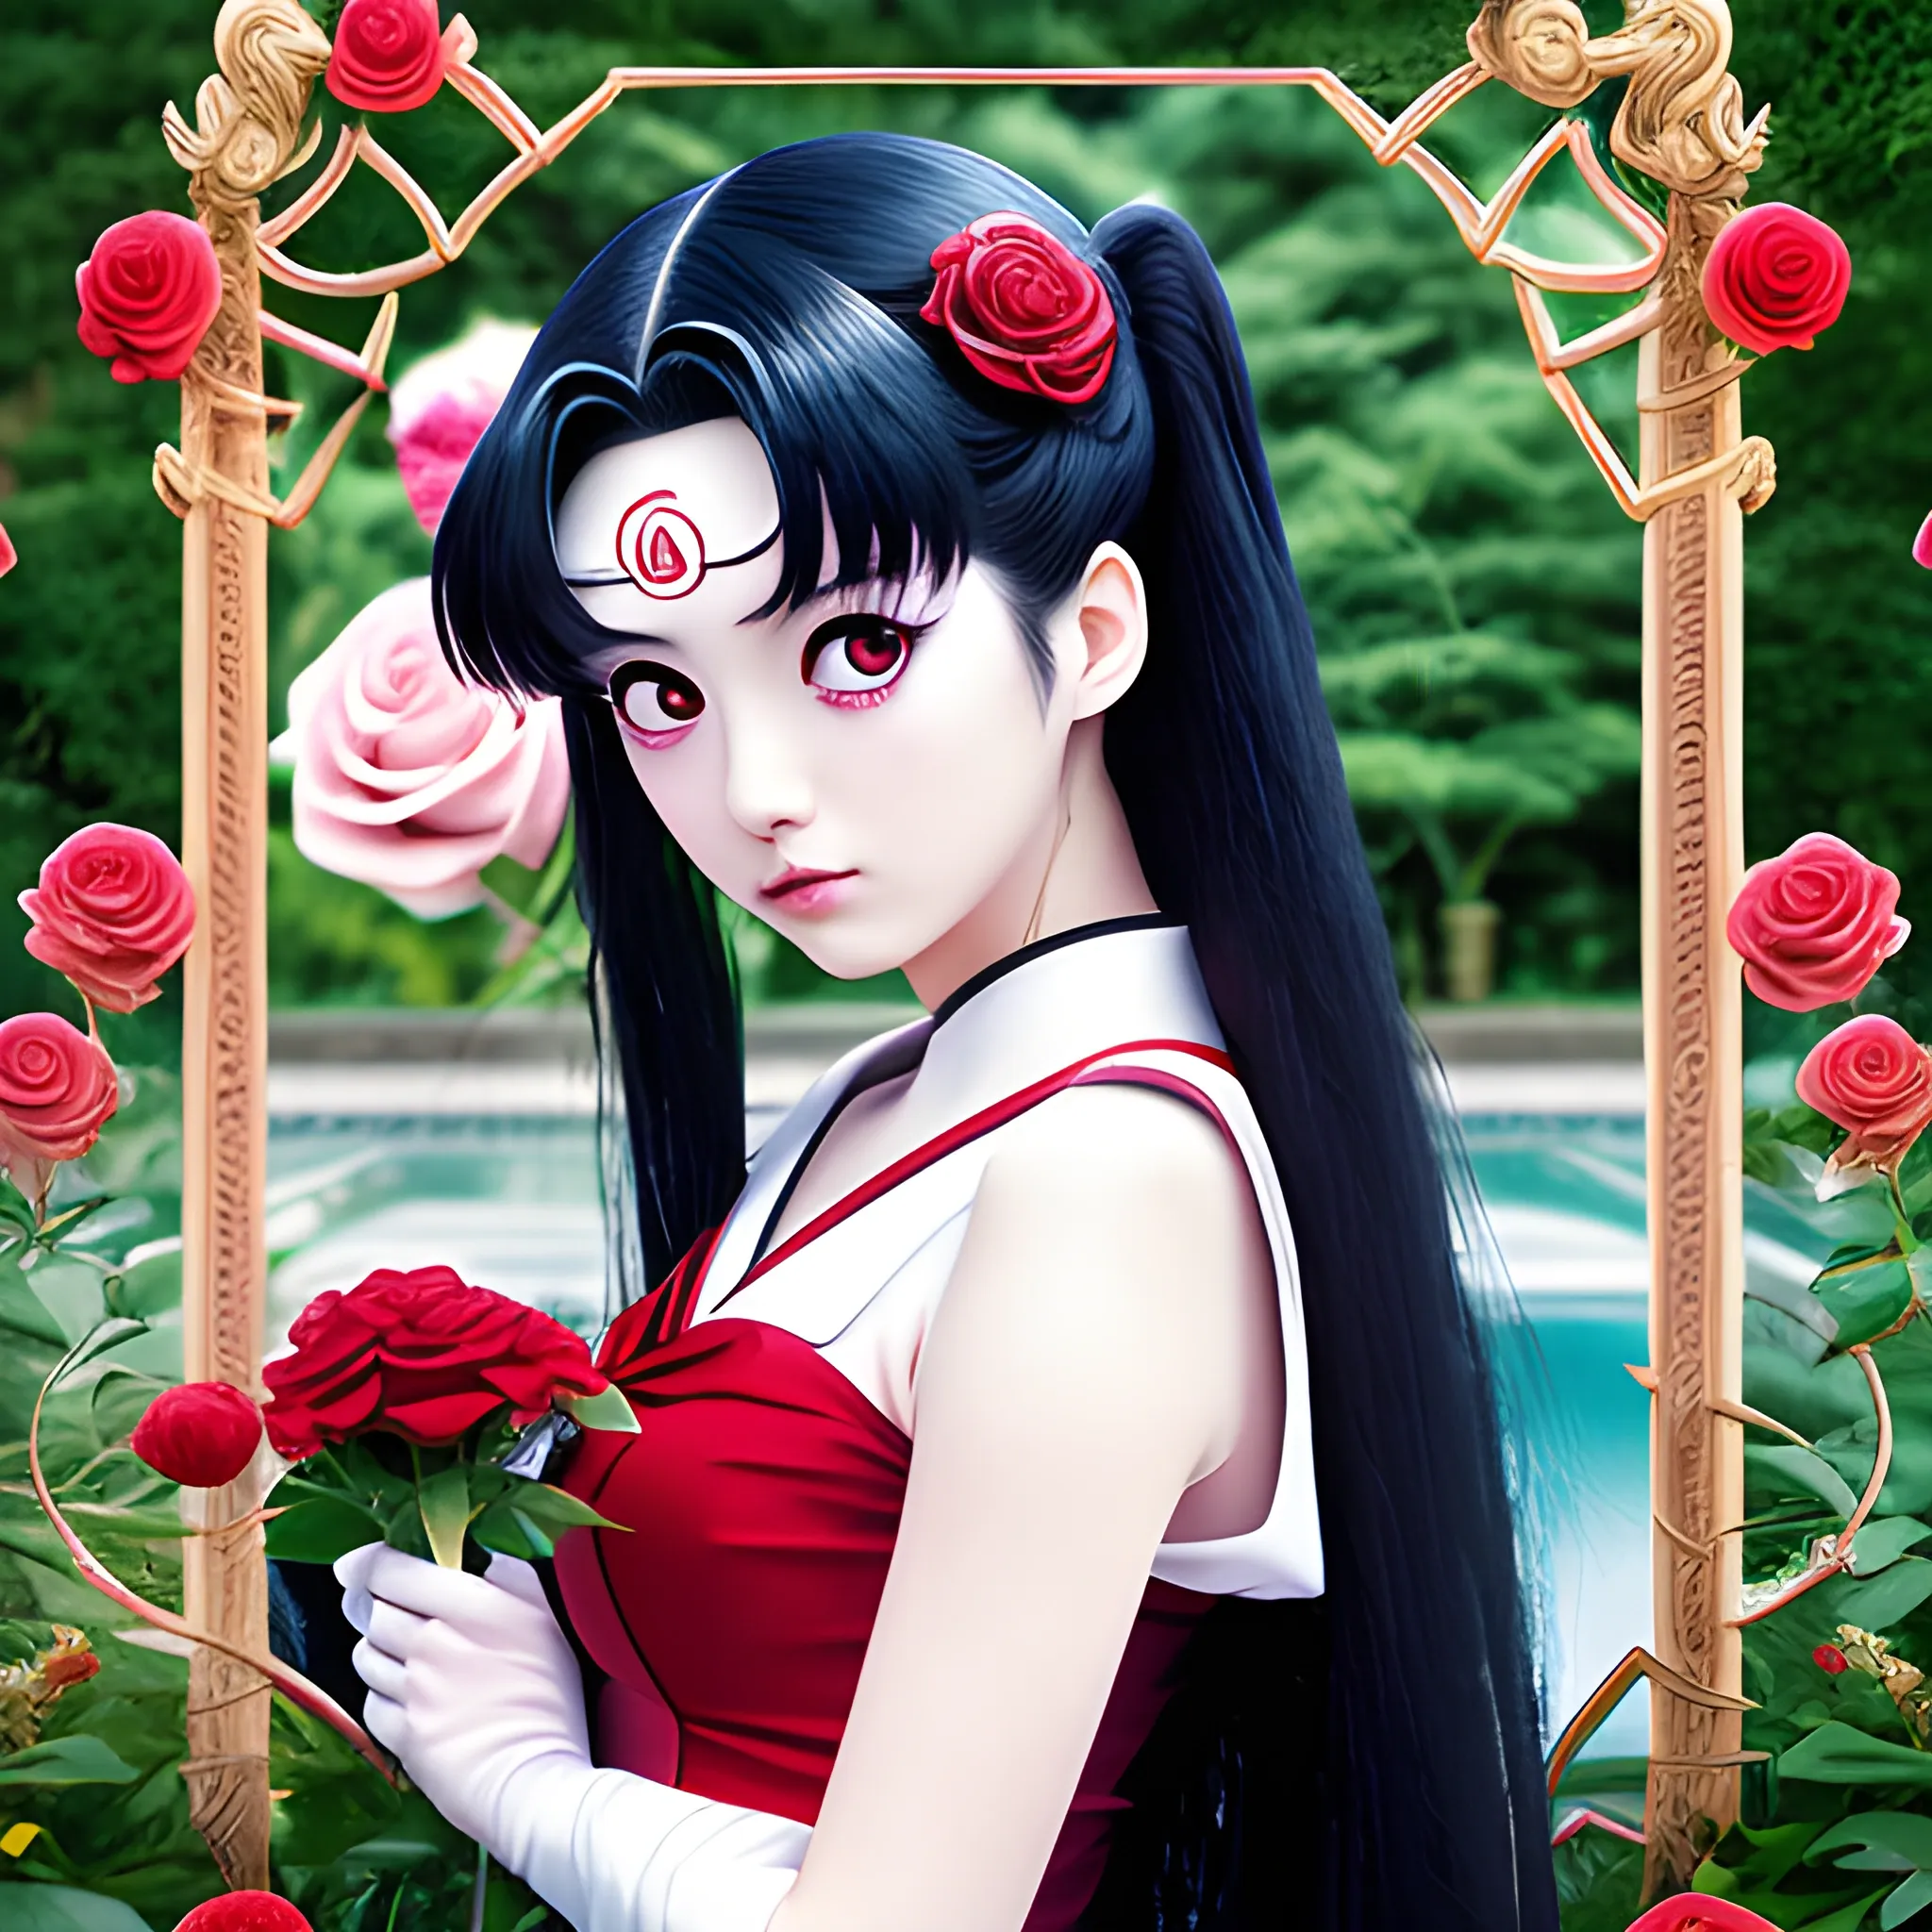 Japanese anime Sailor Moon, sideways, Garden background, wavy long black hair, holding a red rose,Eyes on the rose,Smelling the roses,Stand by the pool,Mirror reflection in wateraward,face parts, face details like eyes, lips etc,winning studio photography, professional colour grading, soft shadows, no contrast, clean sharp focus, Cartoon